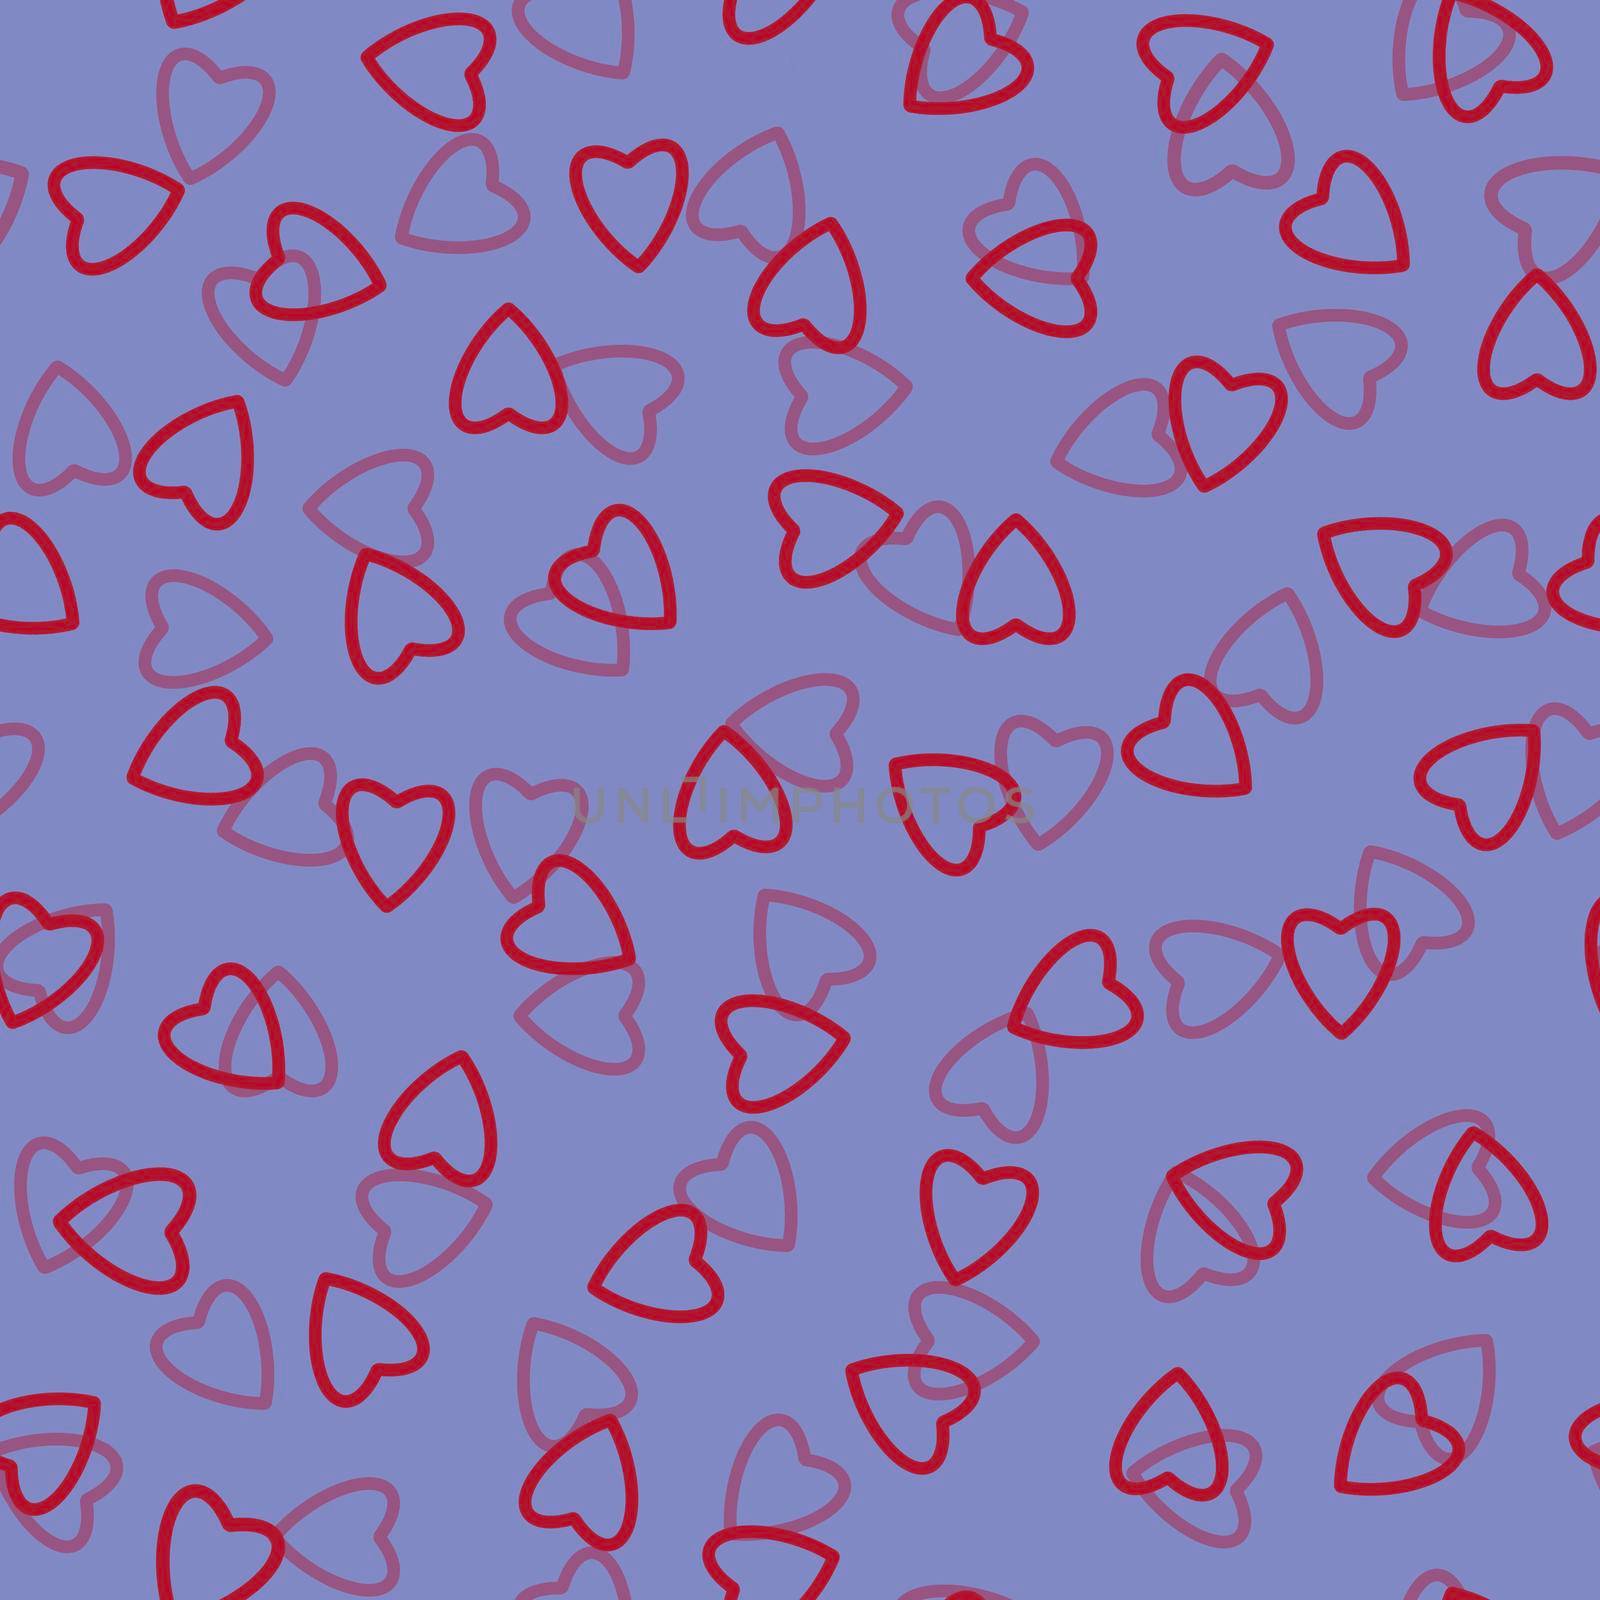 Simple hearts seamless pattern,endless chaotic texture made of tiny heart silhouettes.Valentines,mothers day background.Great for Easter,wedding,scrapbook,gift wrapping paper,textiles.Red on lilac by Angelsmoon